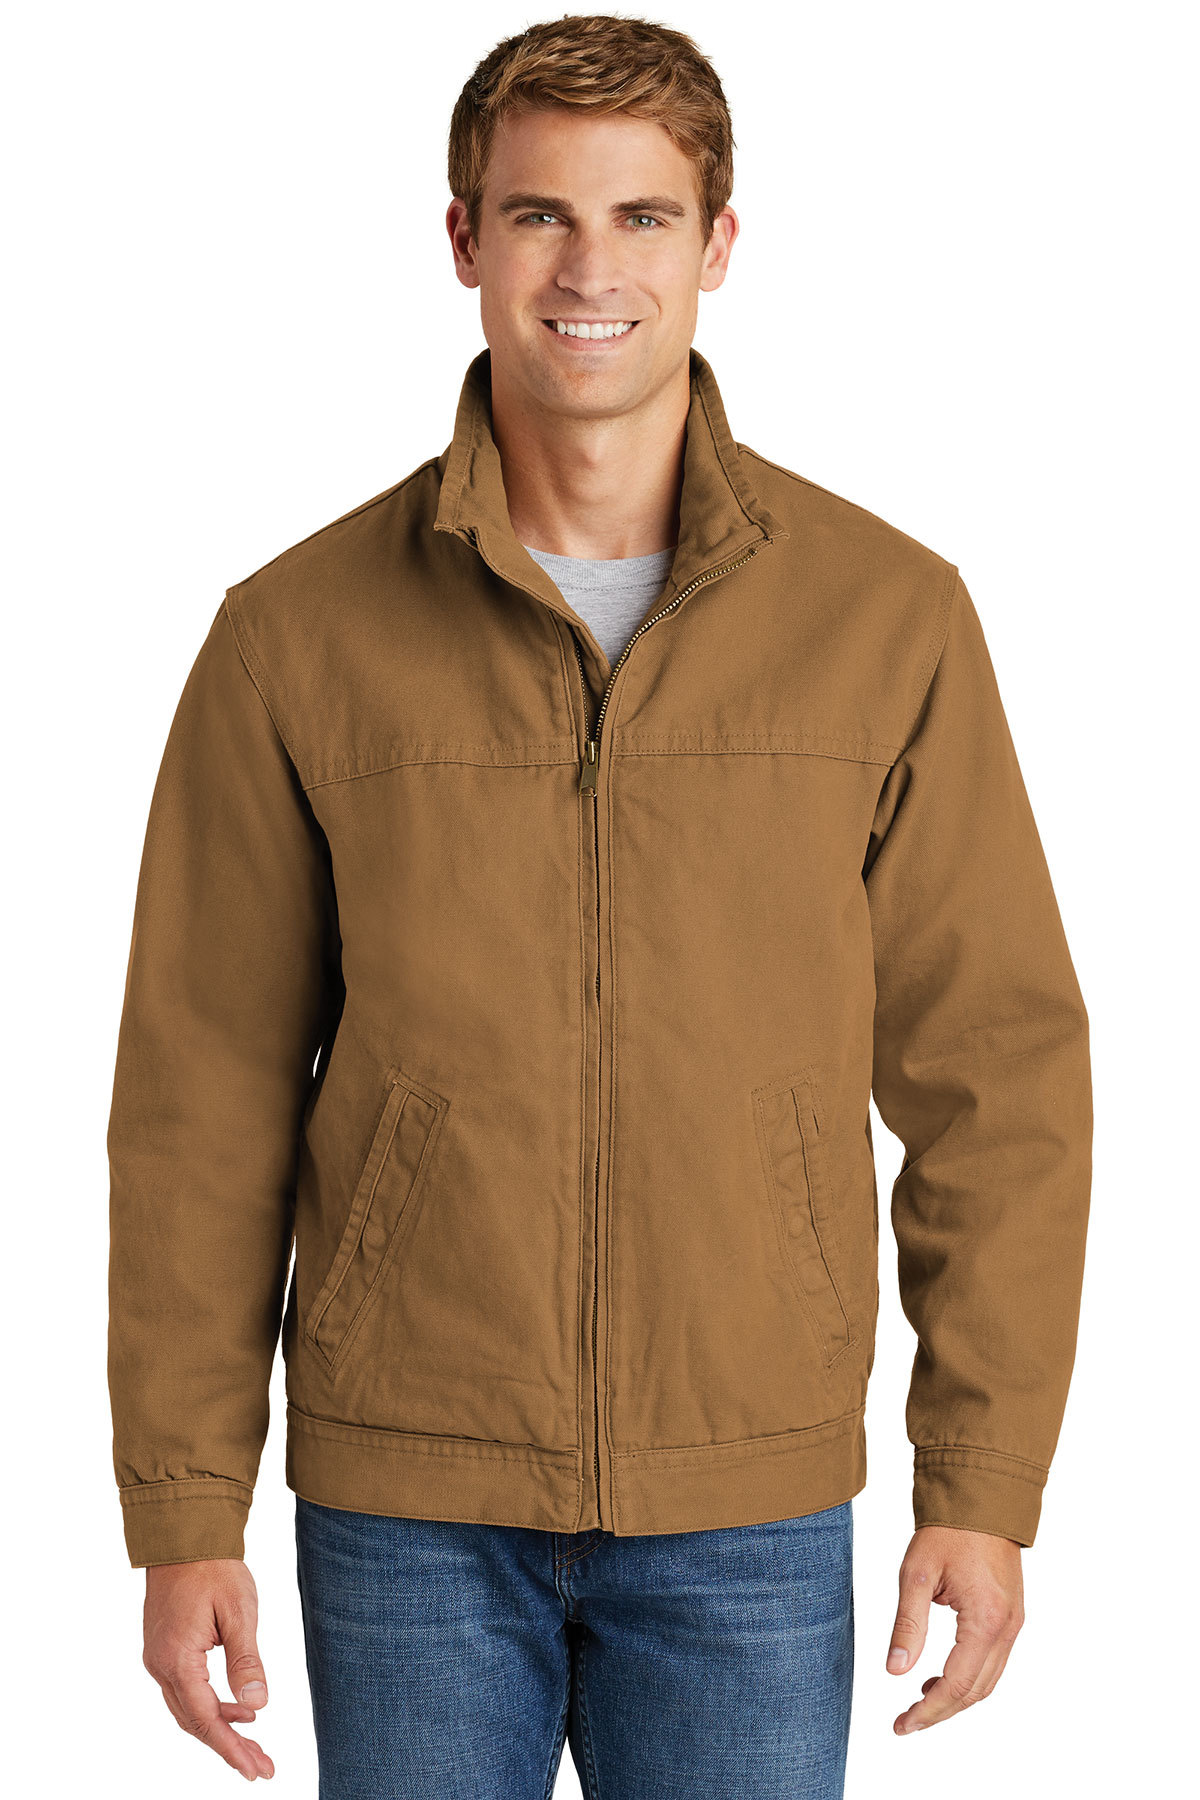 CornerStone Washed Duck Cloth Flannel-Lined Work Jacket | Product